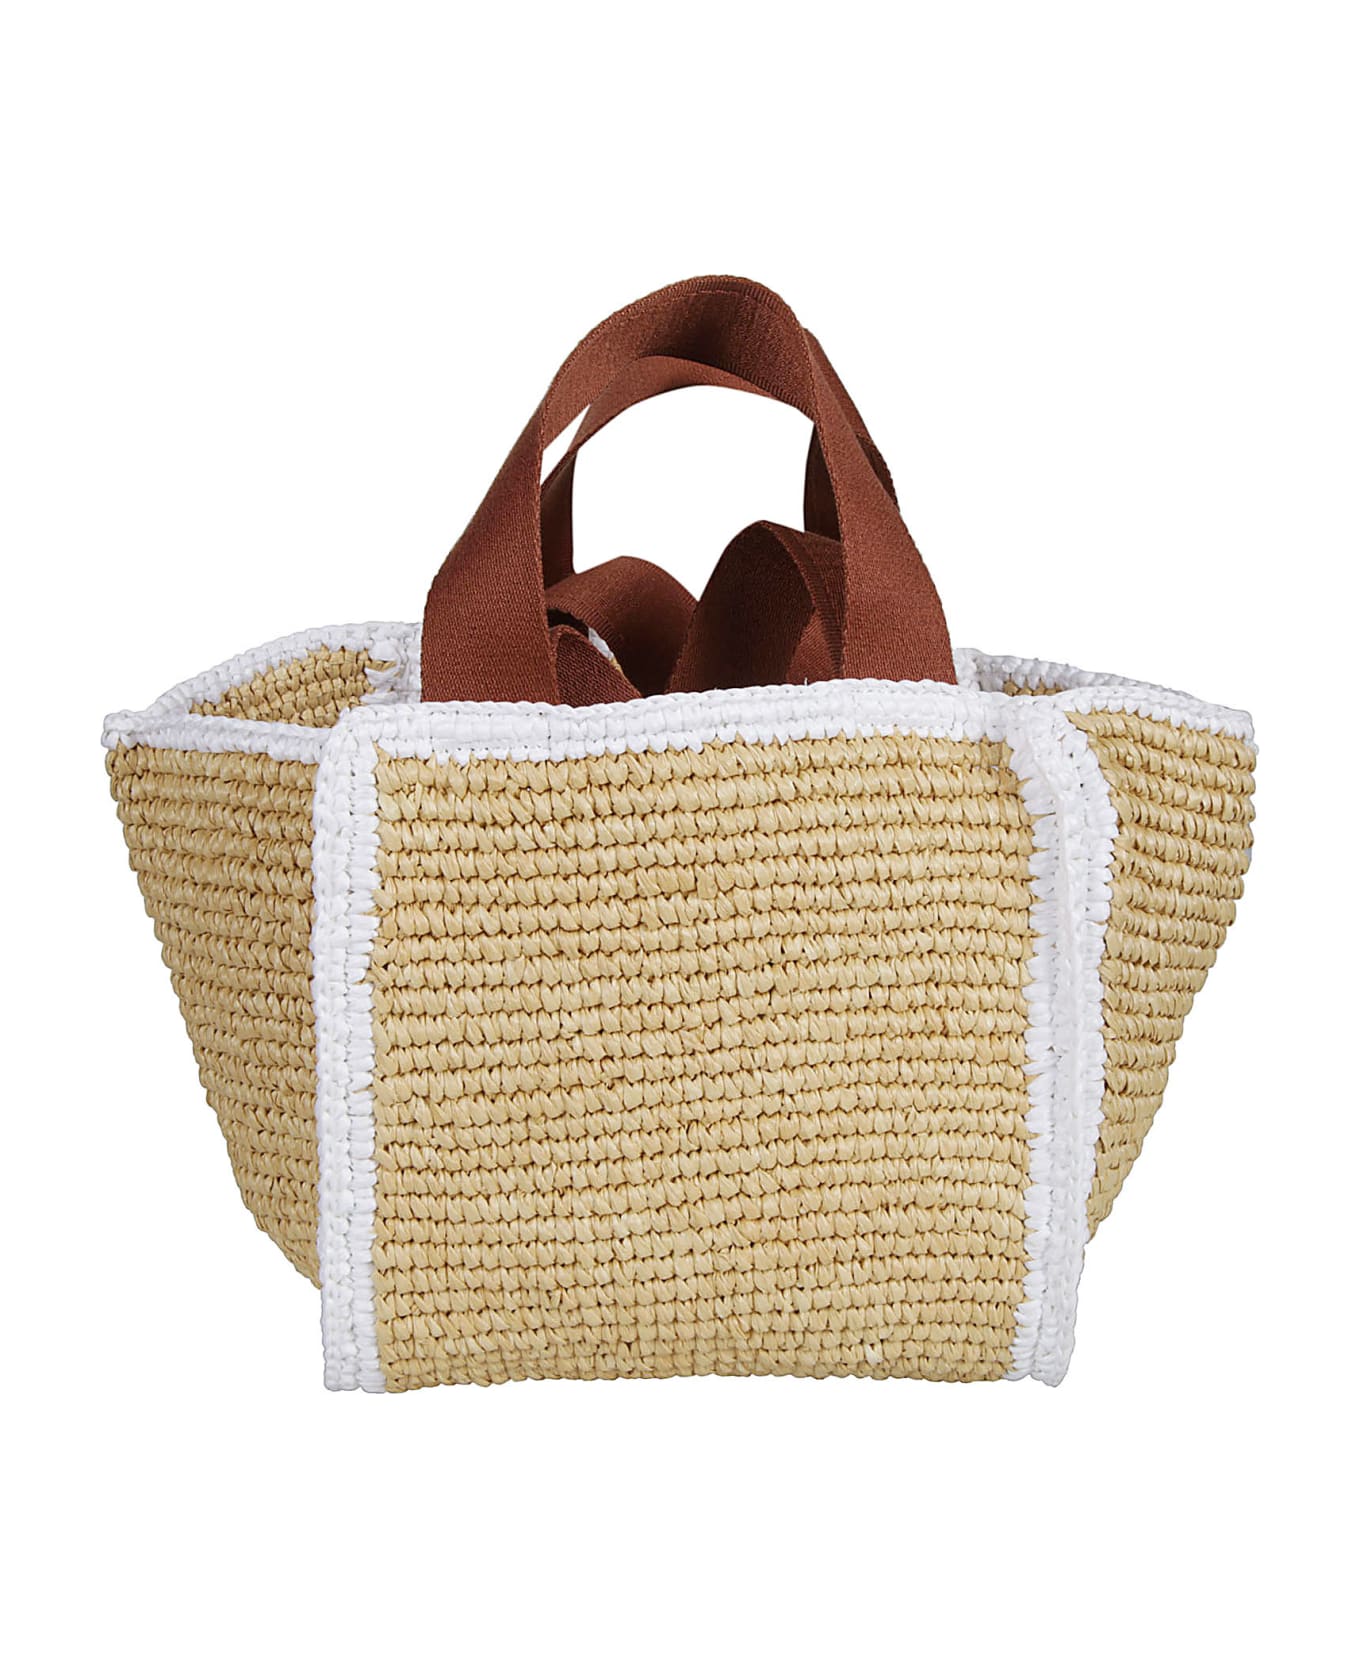 Marni Logo Embroidered Woven Top Handle Tote - White トートバッグ